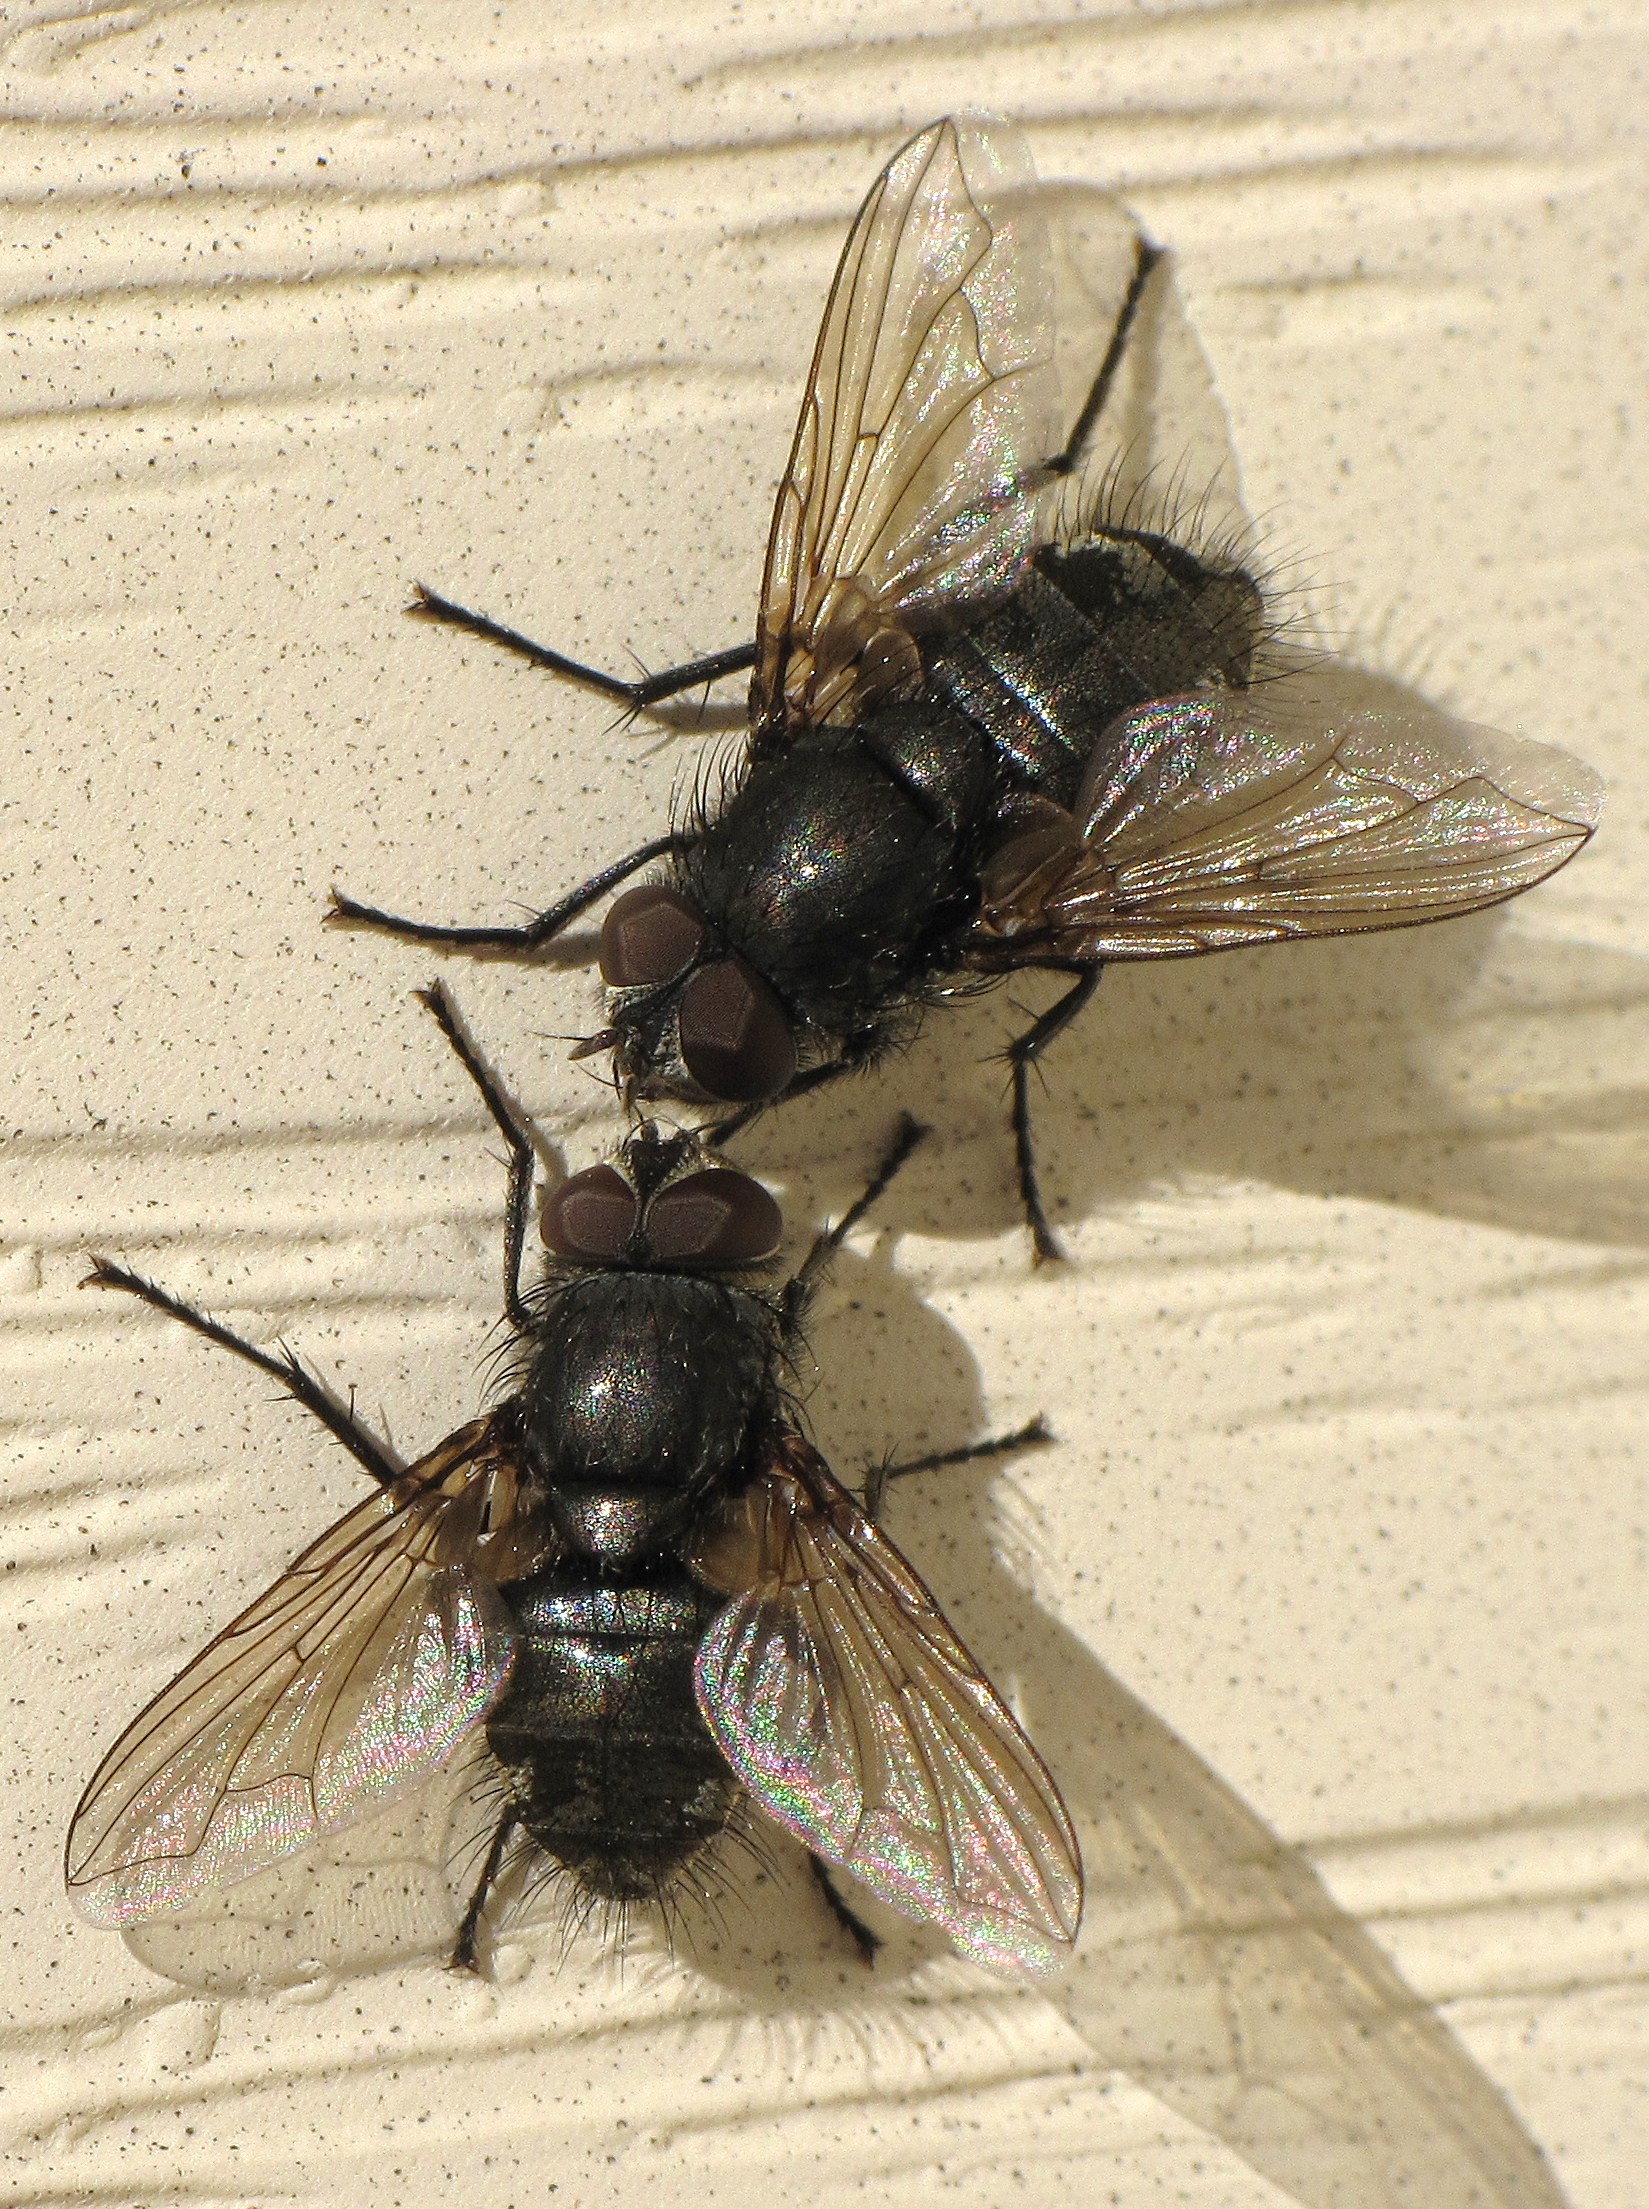 two flies on the house | The Bug Geek